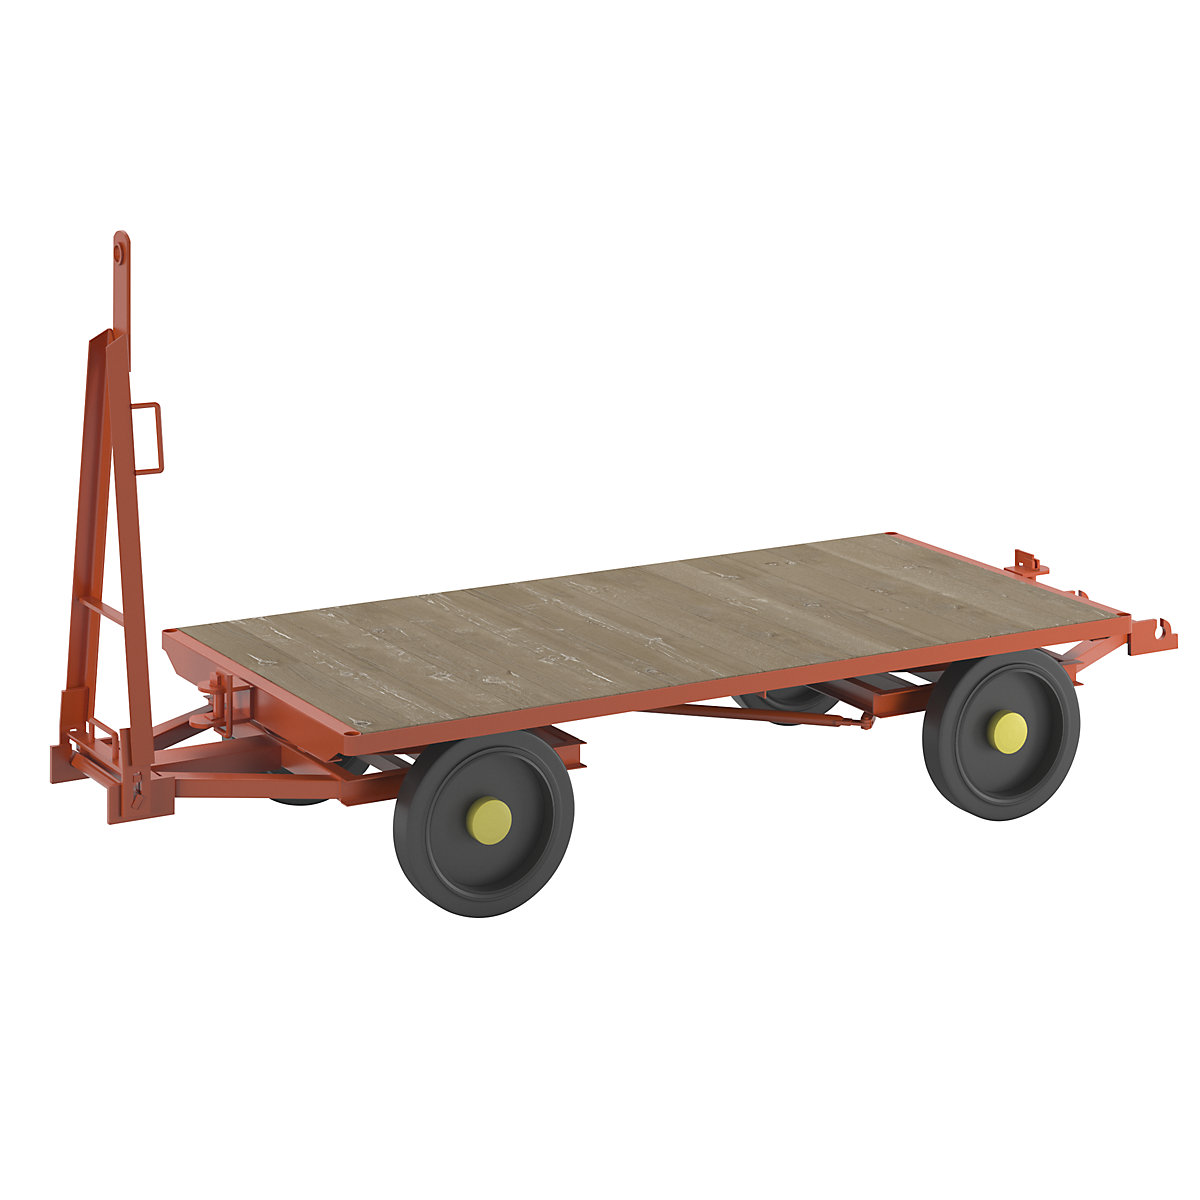 Trailer, 4-wheel double turntable steering, max. load 3 t, platform 2.0 x 1.0 m, solid rubber tyres-3